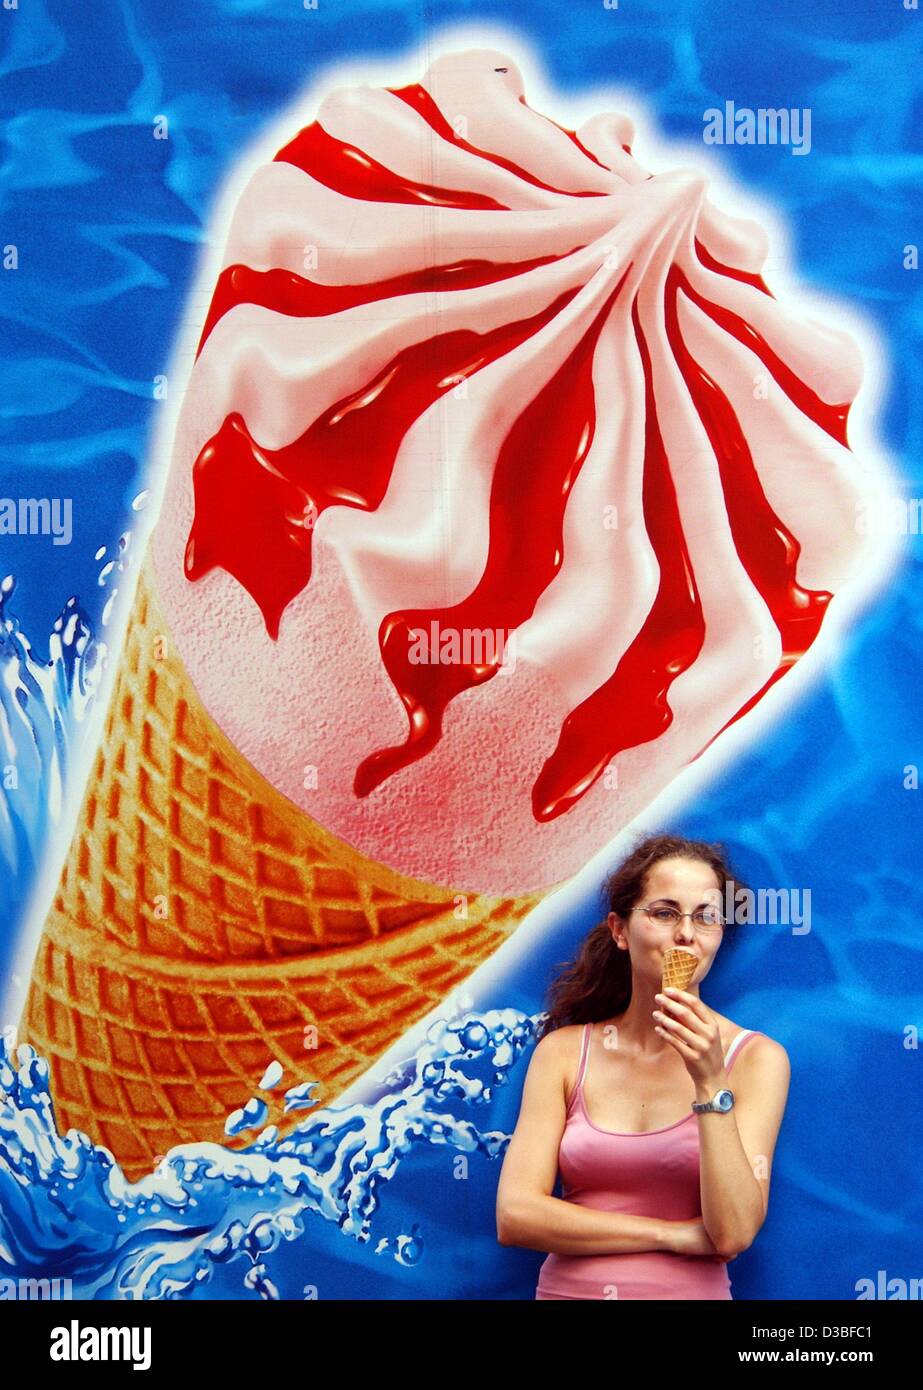 (dpa) - A young woman savours her ice-cream wafer in front of a huge ice advertisement on a lorry, in Frankfurt, Germany, 23 June 2003.  keywords: Lifestyle-Leisure, LIF, Gastronomy, ice cream, huge, cornetto, eiswaffel, ice-cream wafer, GERMANY:DEU, Feature, single Stock Photo